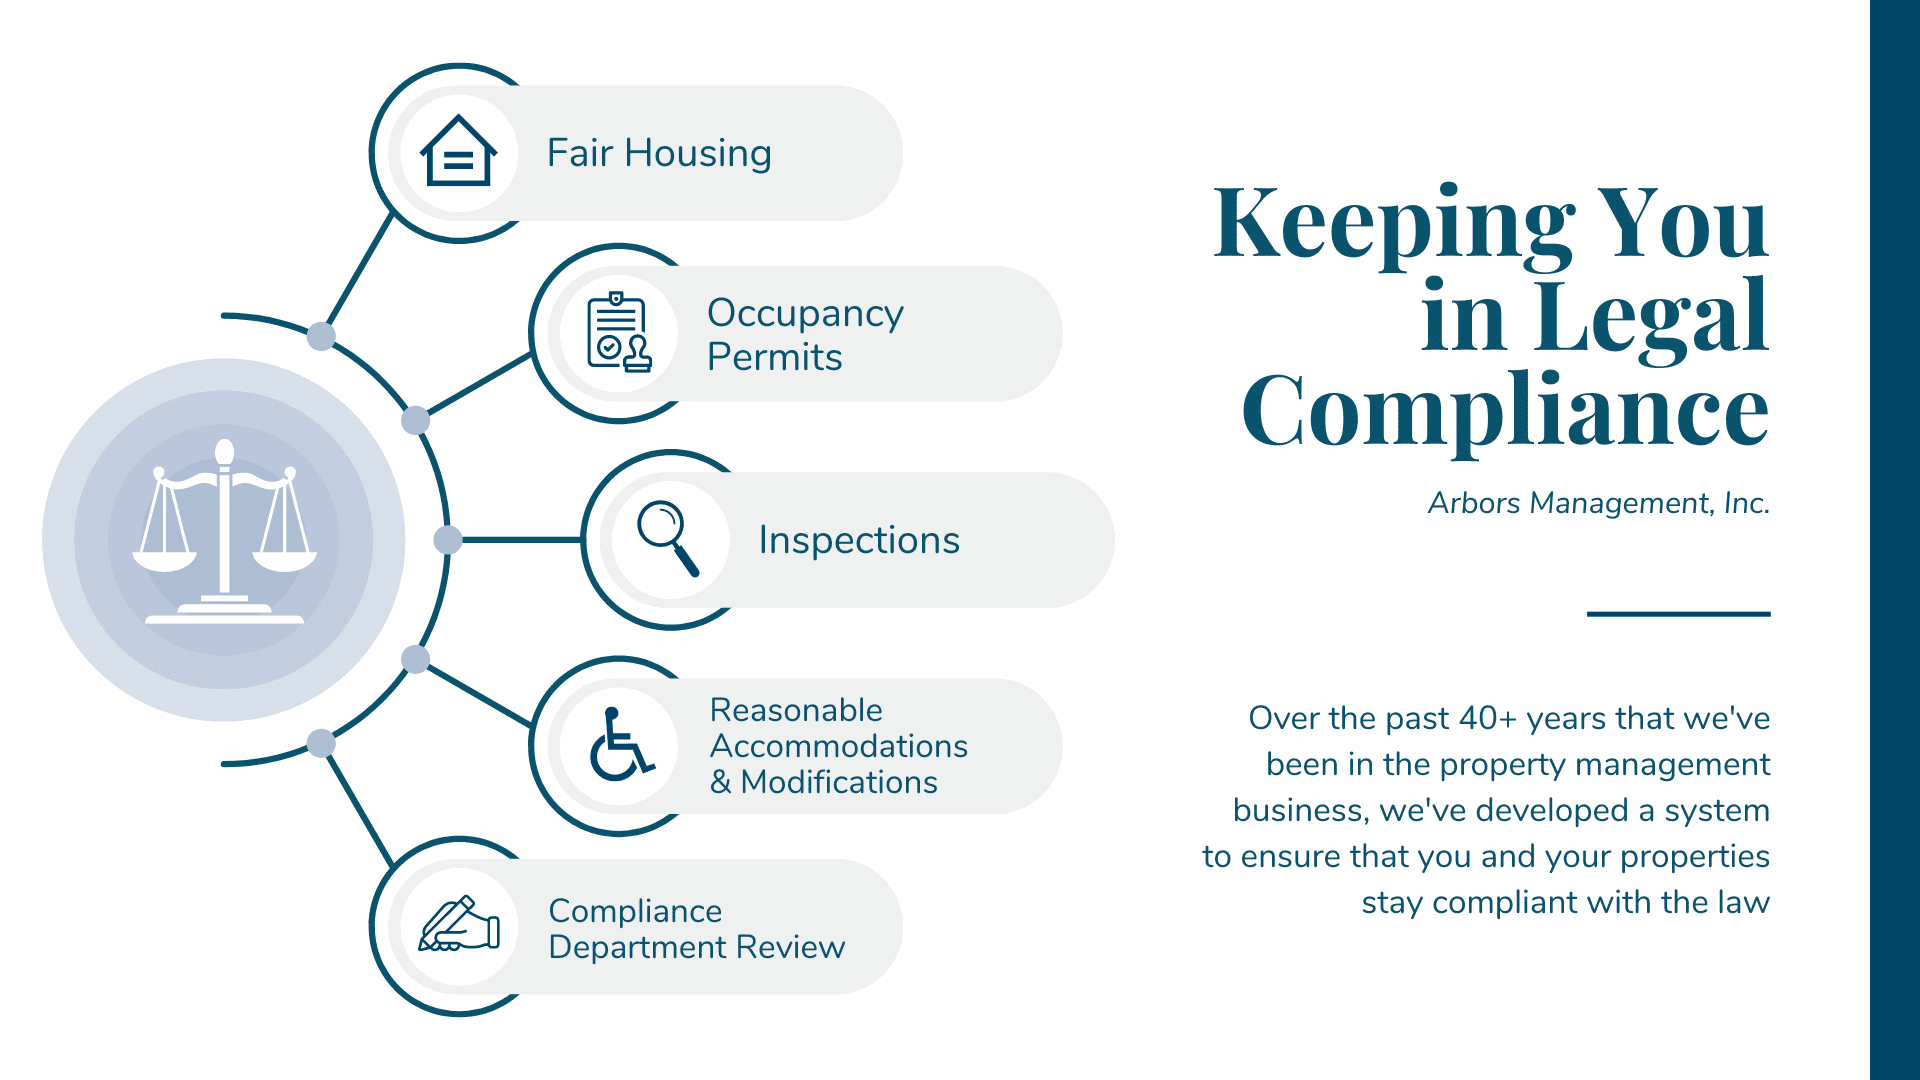 How We Keep Our Clients in Compliance with the Law